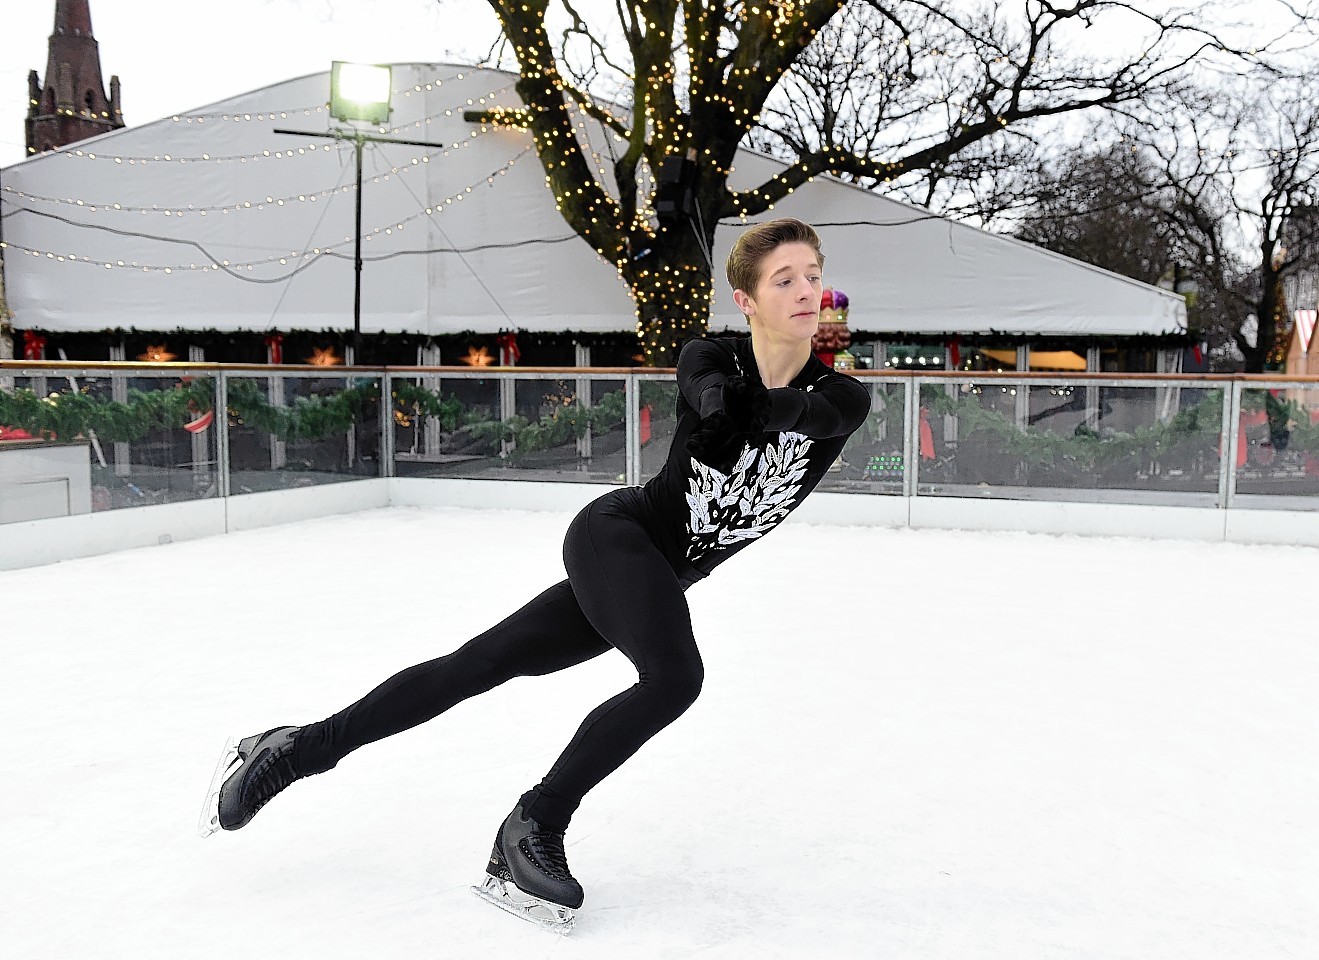 Aberdonian and Robert Gordon's College pupil Ruaridh Fisher on the ice rink at Aberdeen's Christmas village.